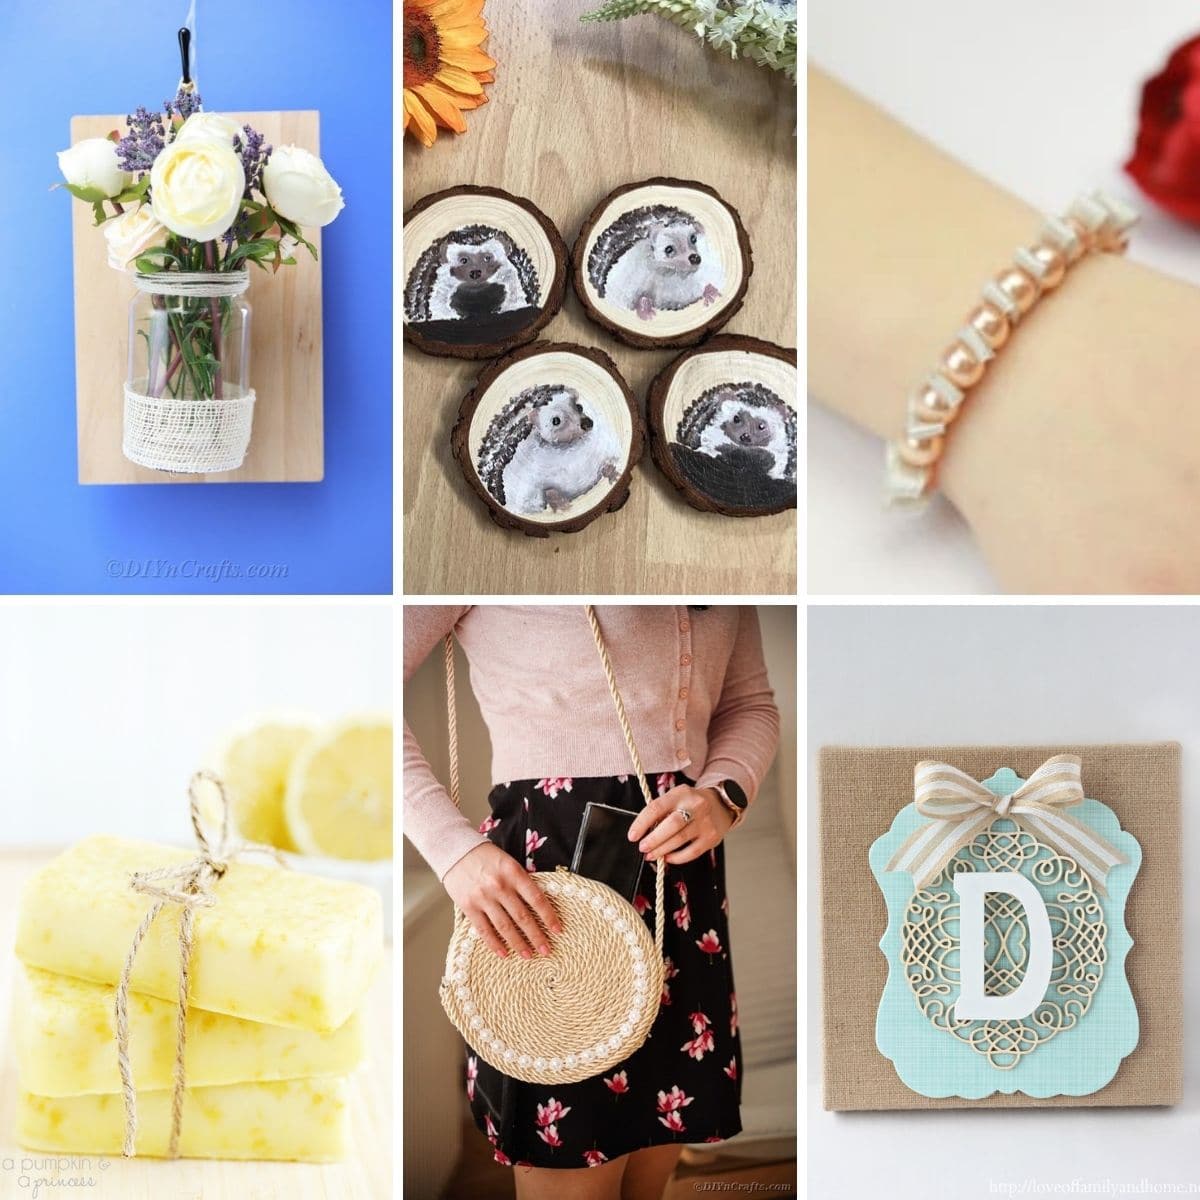 15 DIY Valentine's Day Gifts That Beat Store Bought Any Day - Society19